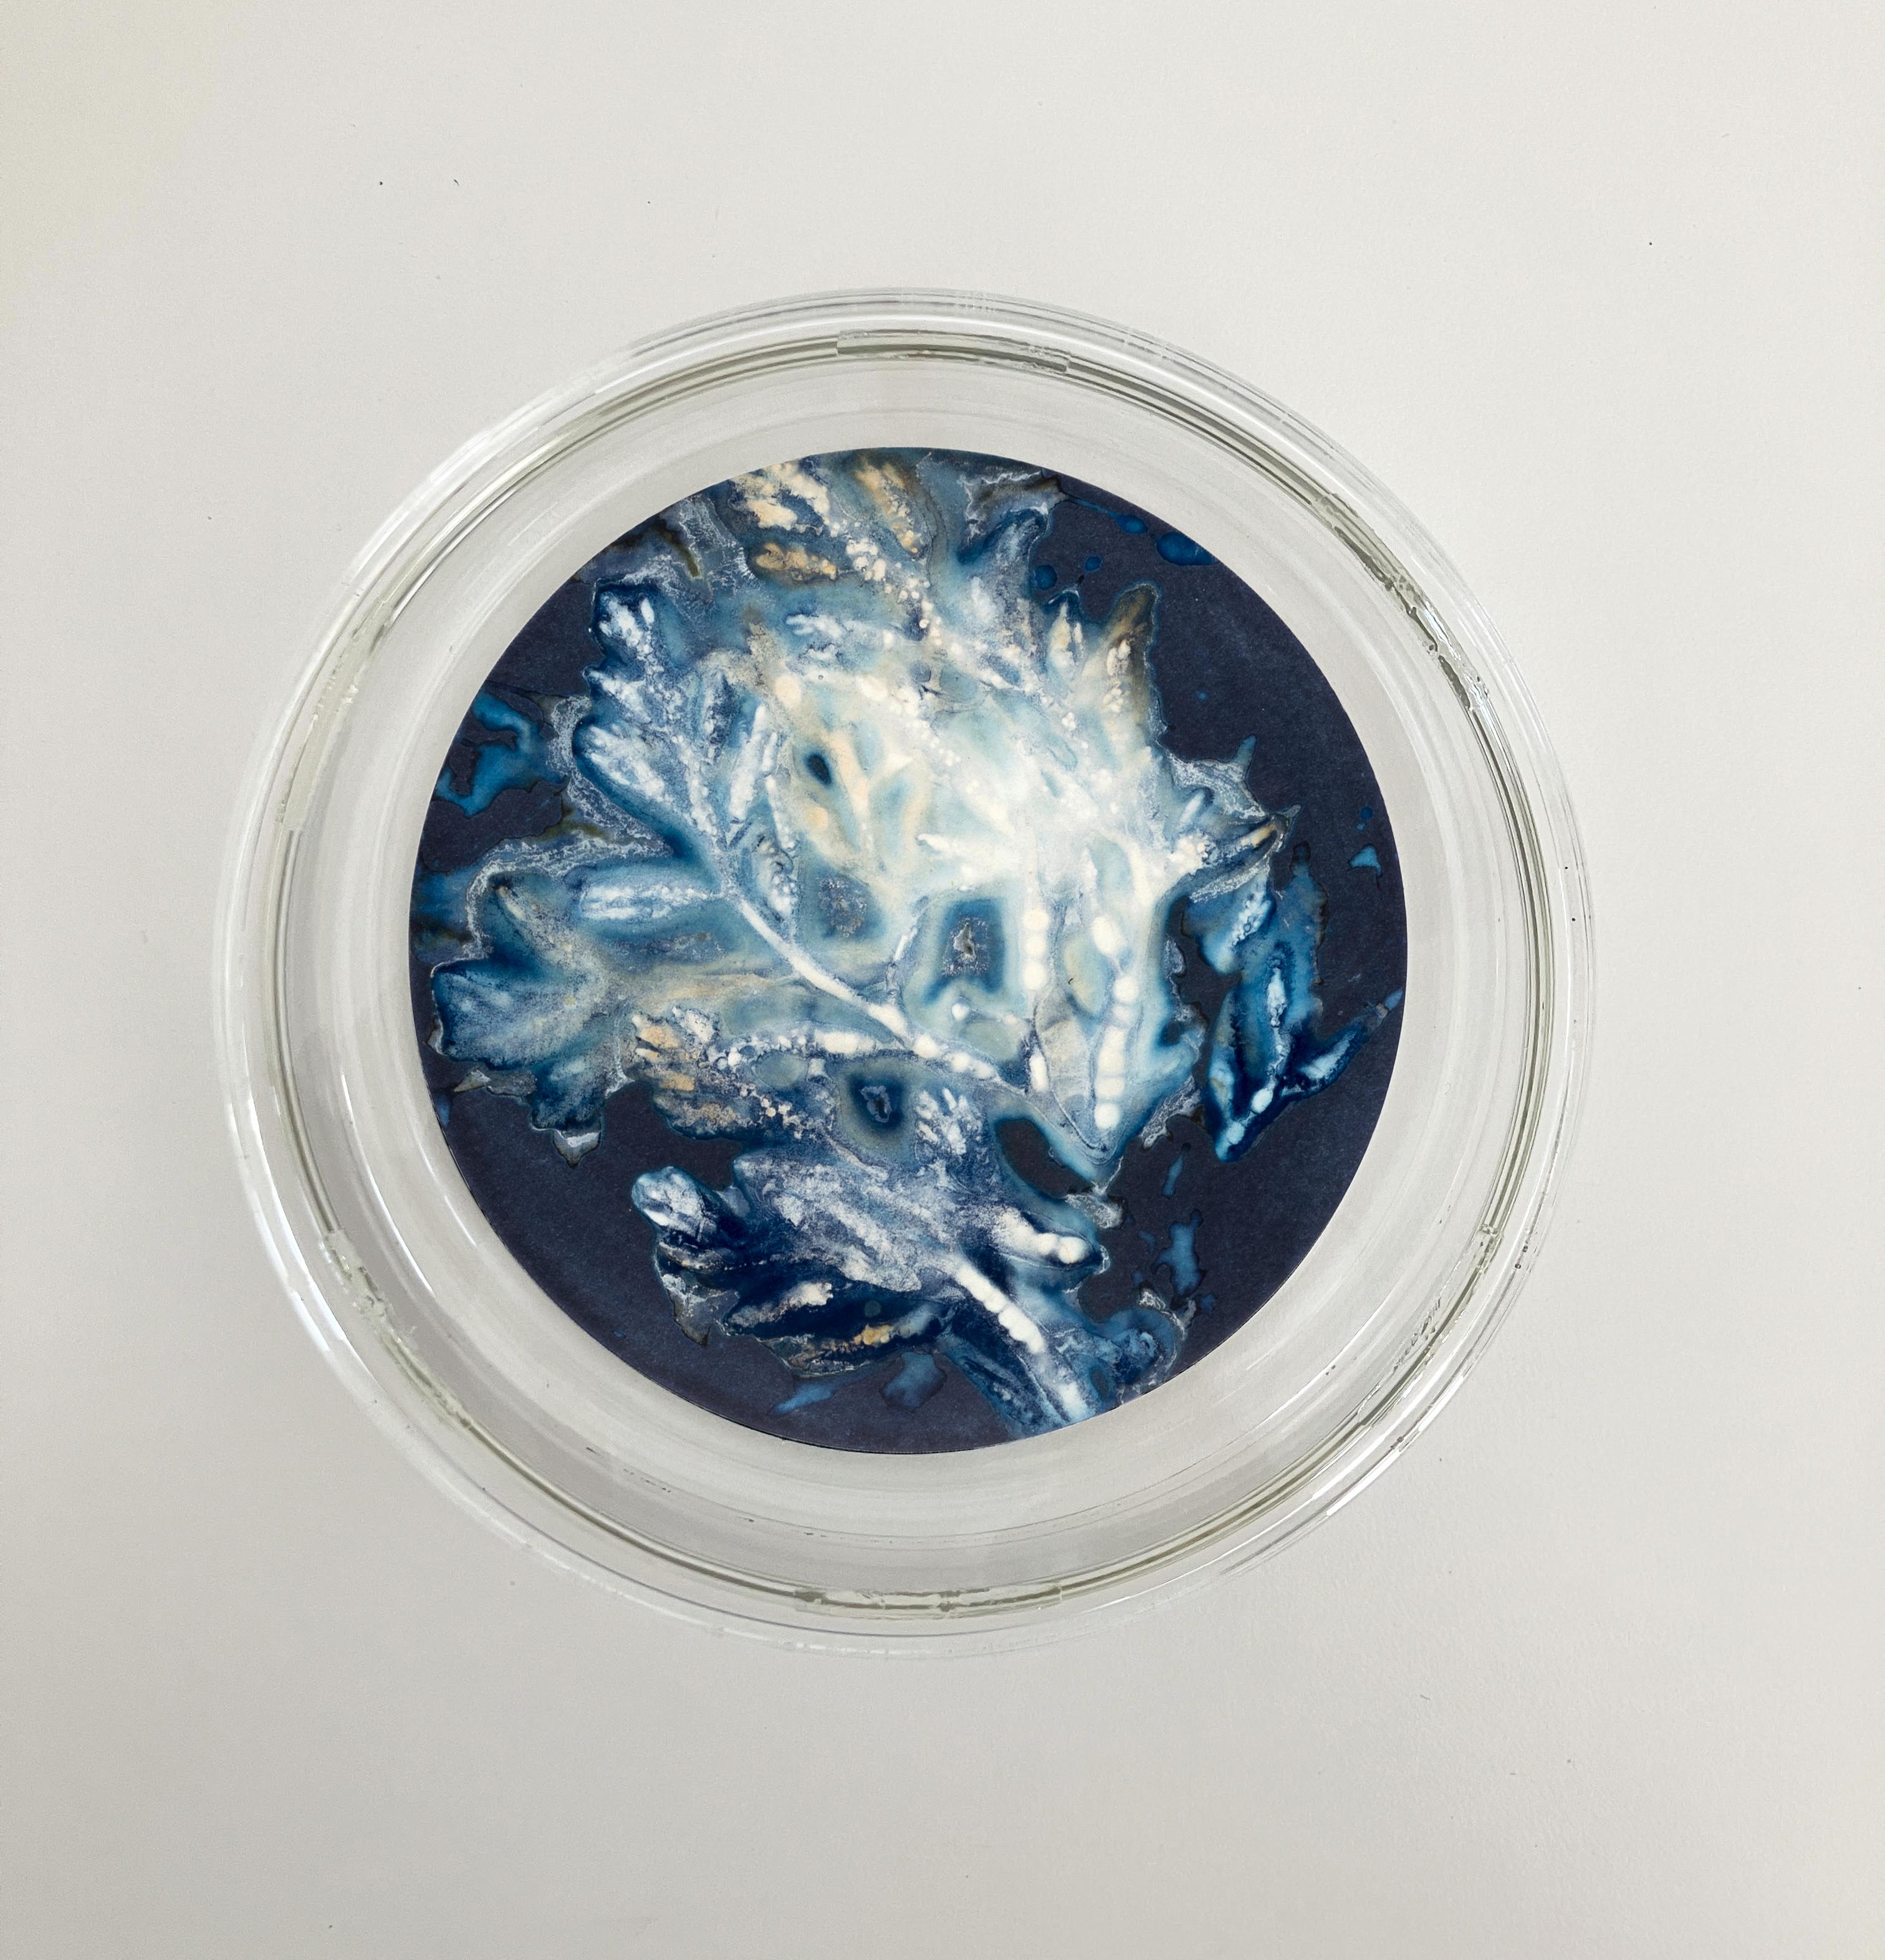 Algas 88, 28, 87. Cyanotype photograhs mounted in high resistance glass dish For Sale 2